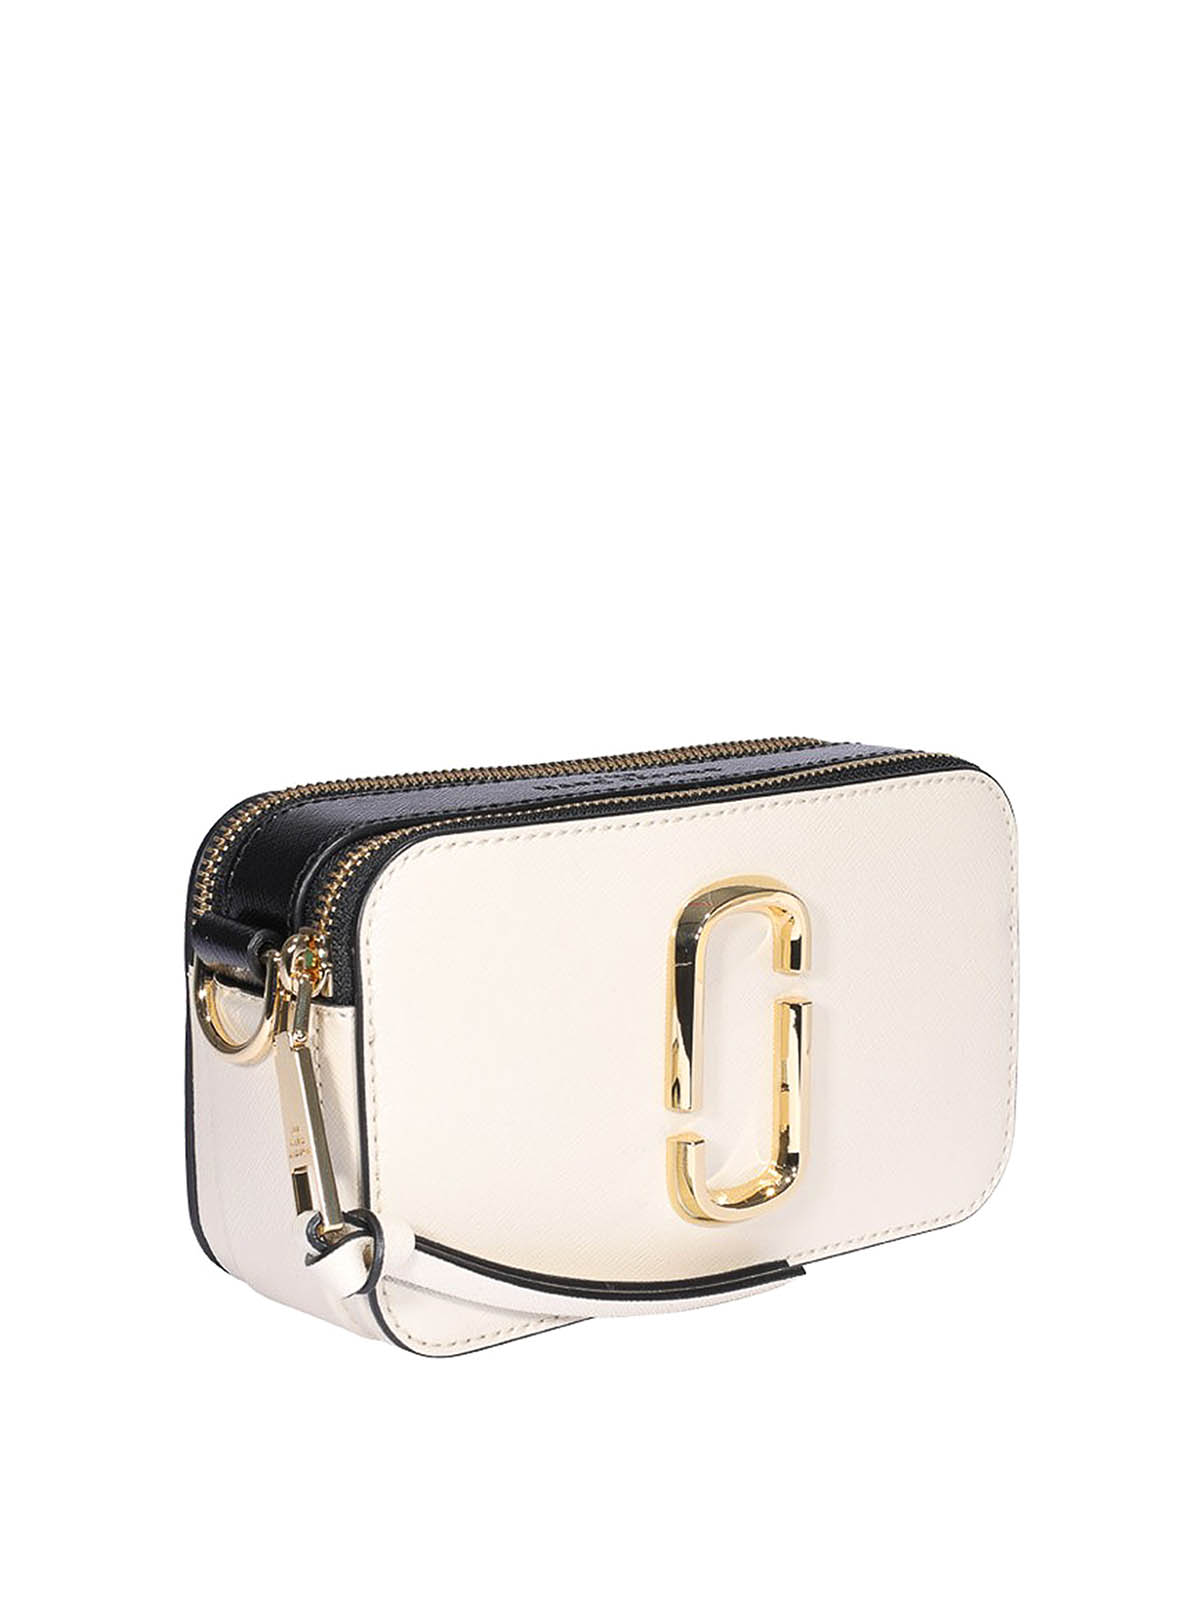 Marc Jacobs Small Snapshot Camera Bag - Authentic - New Cloud White Multi